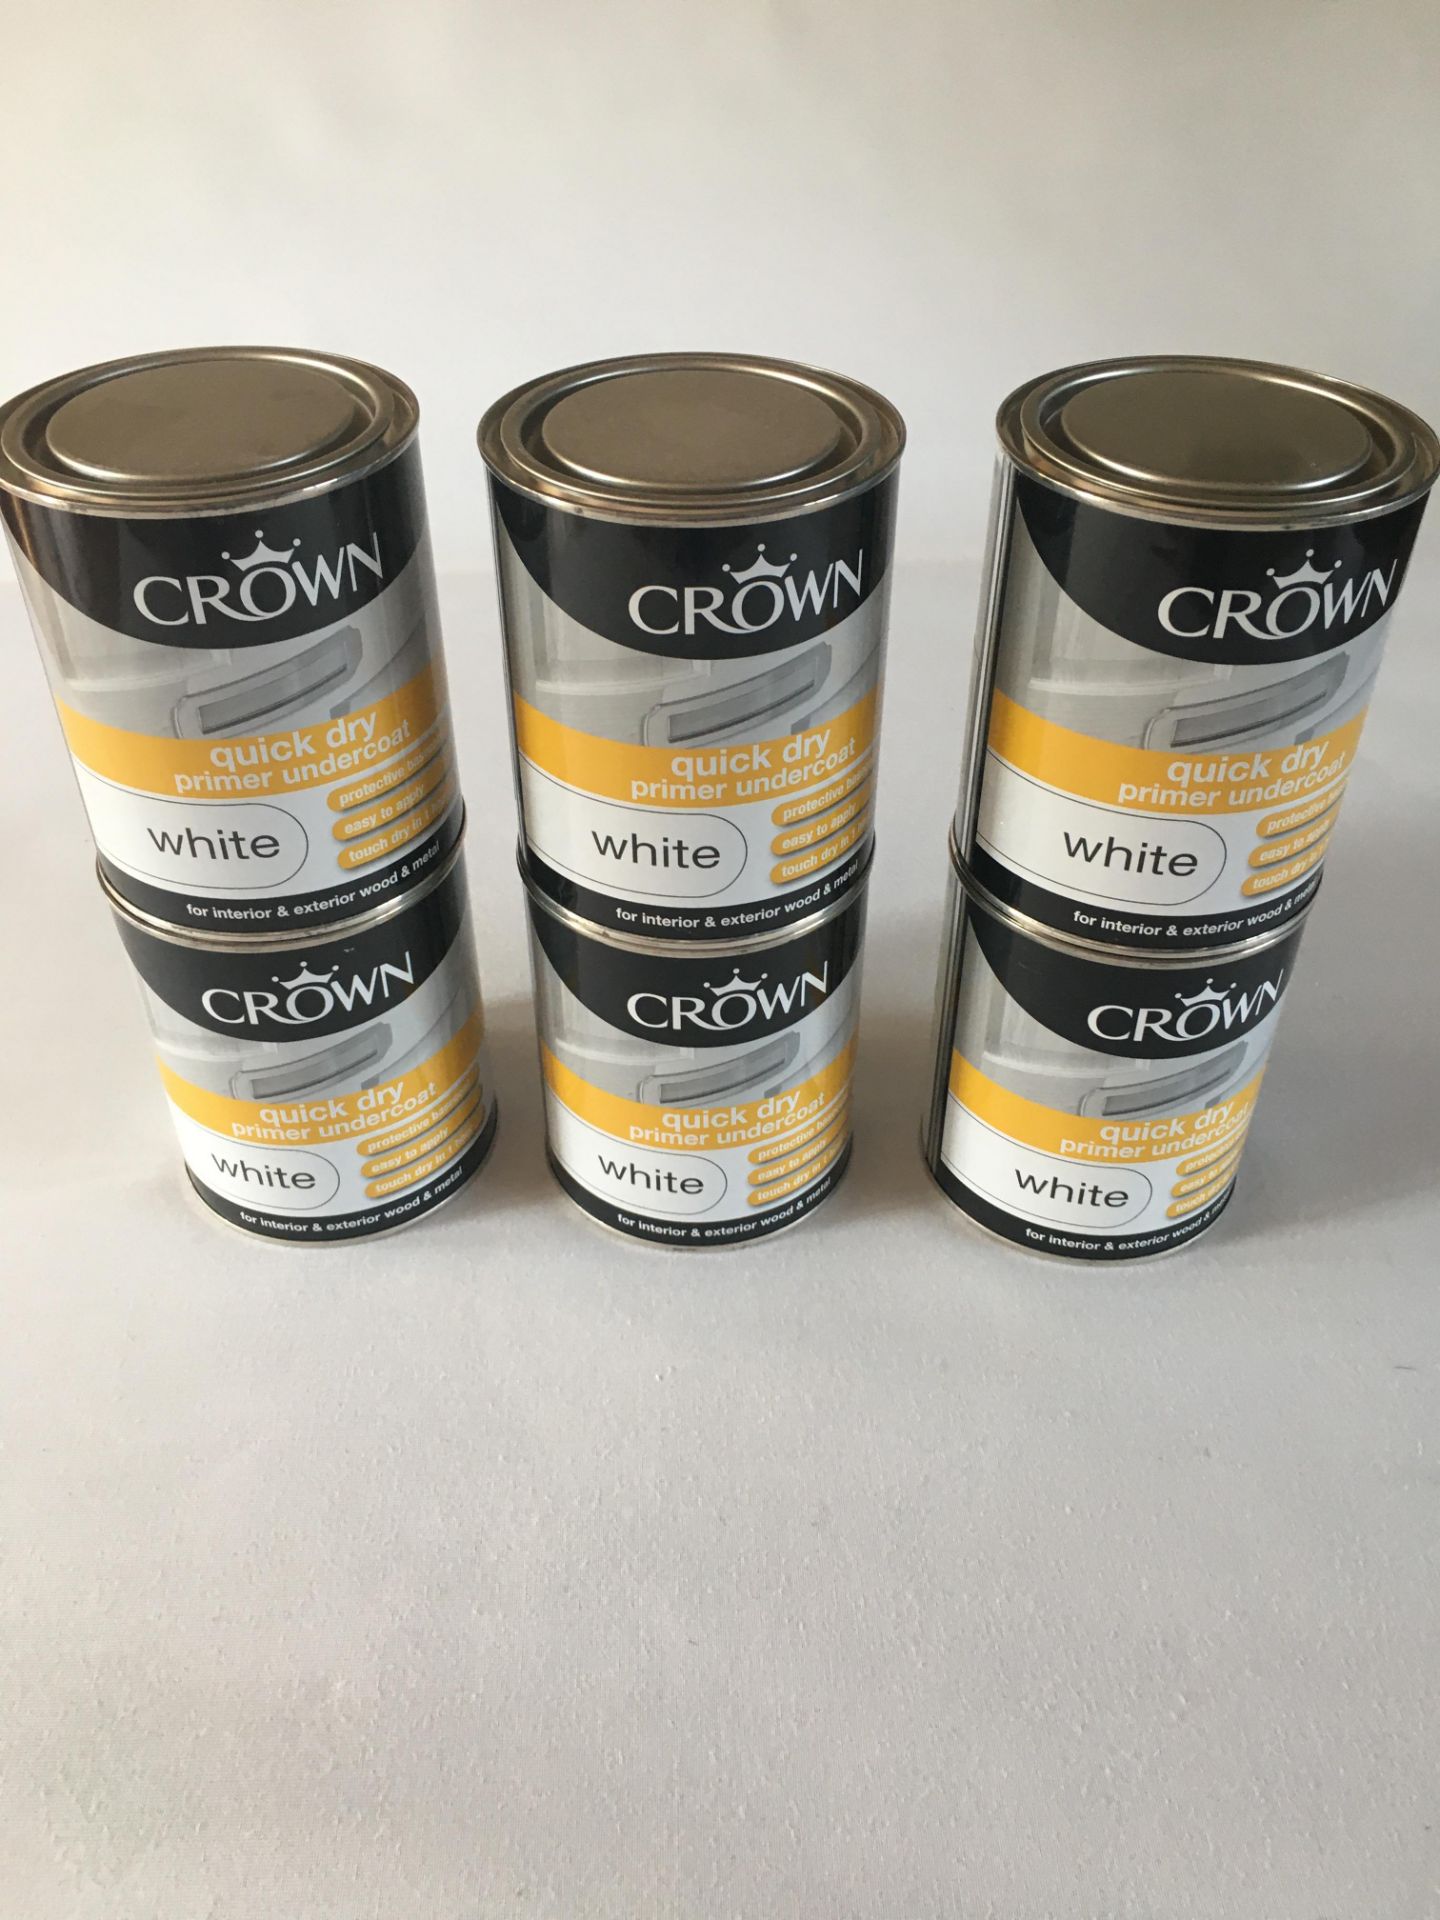 6 x crown quick dry primer undercoat white 750ml rrp £12 - Image 2 of 3